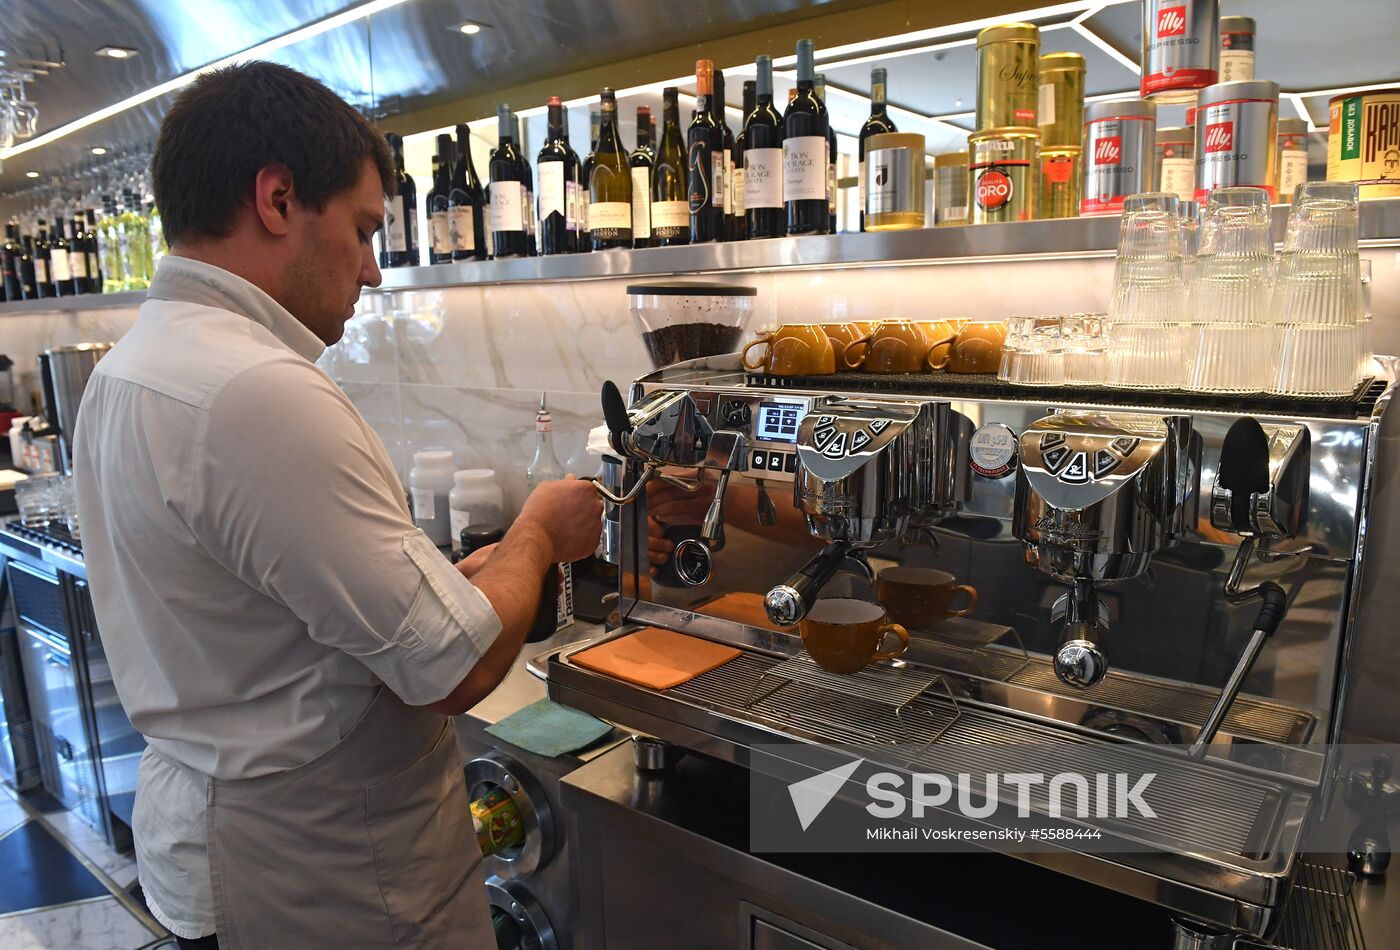 First Azbuka Vkusa cafes open in Moscow